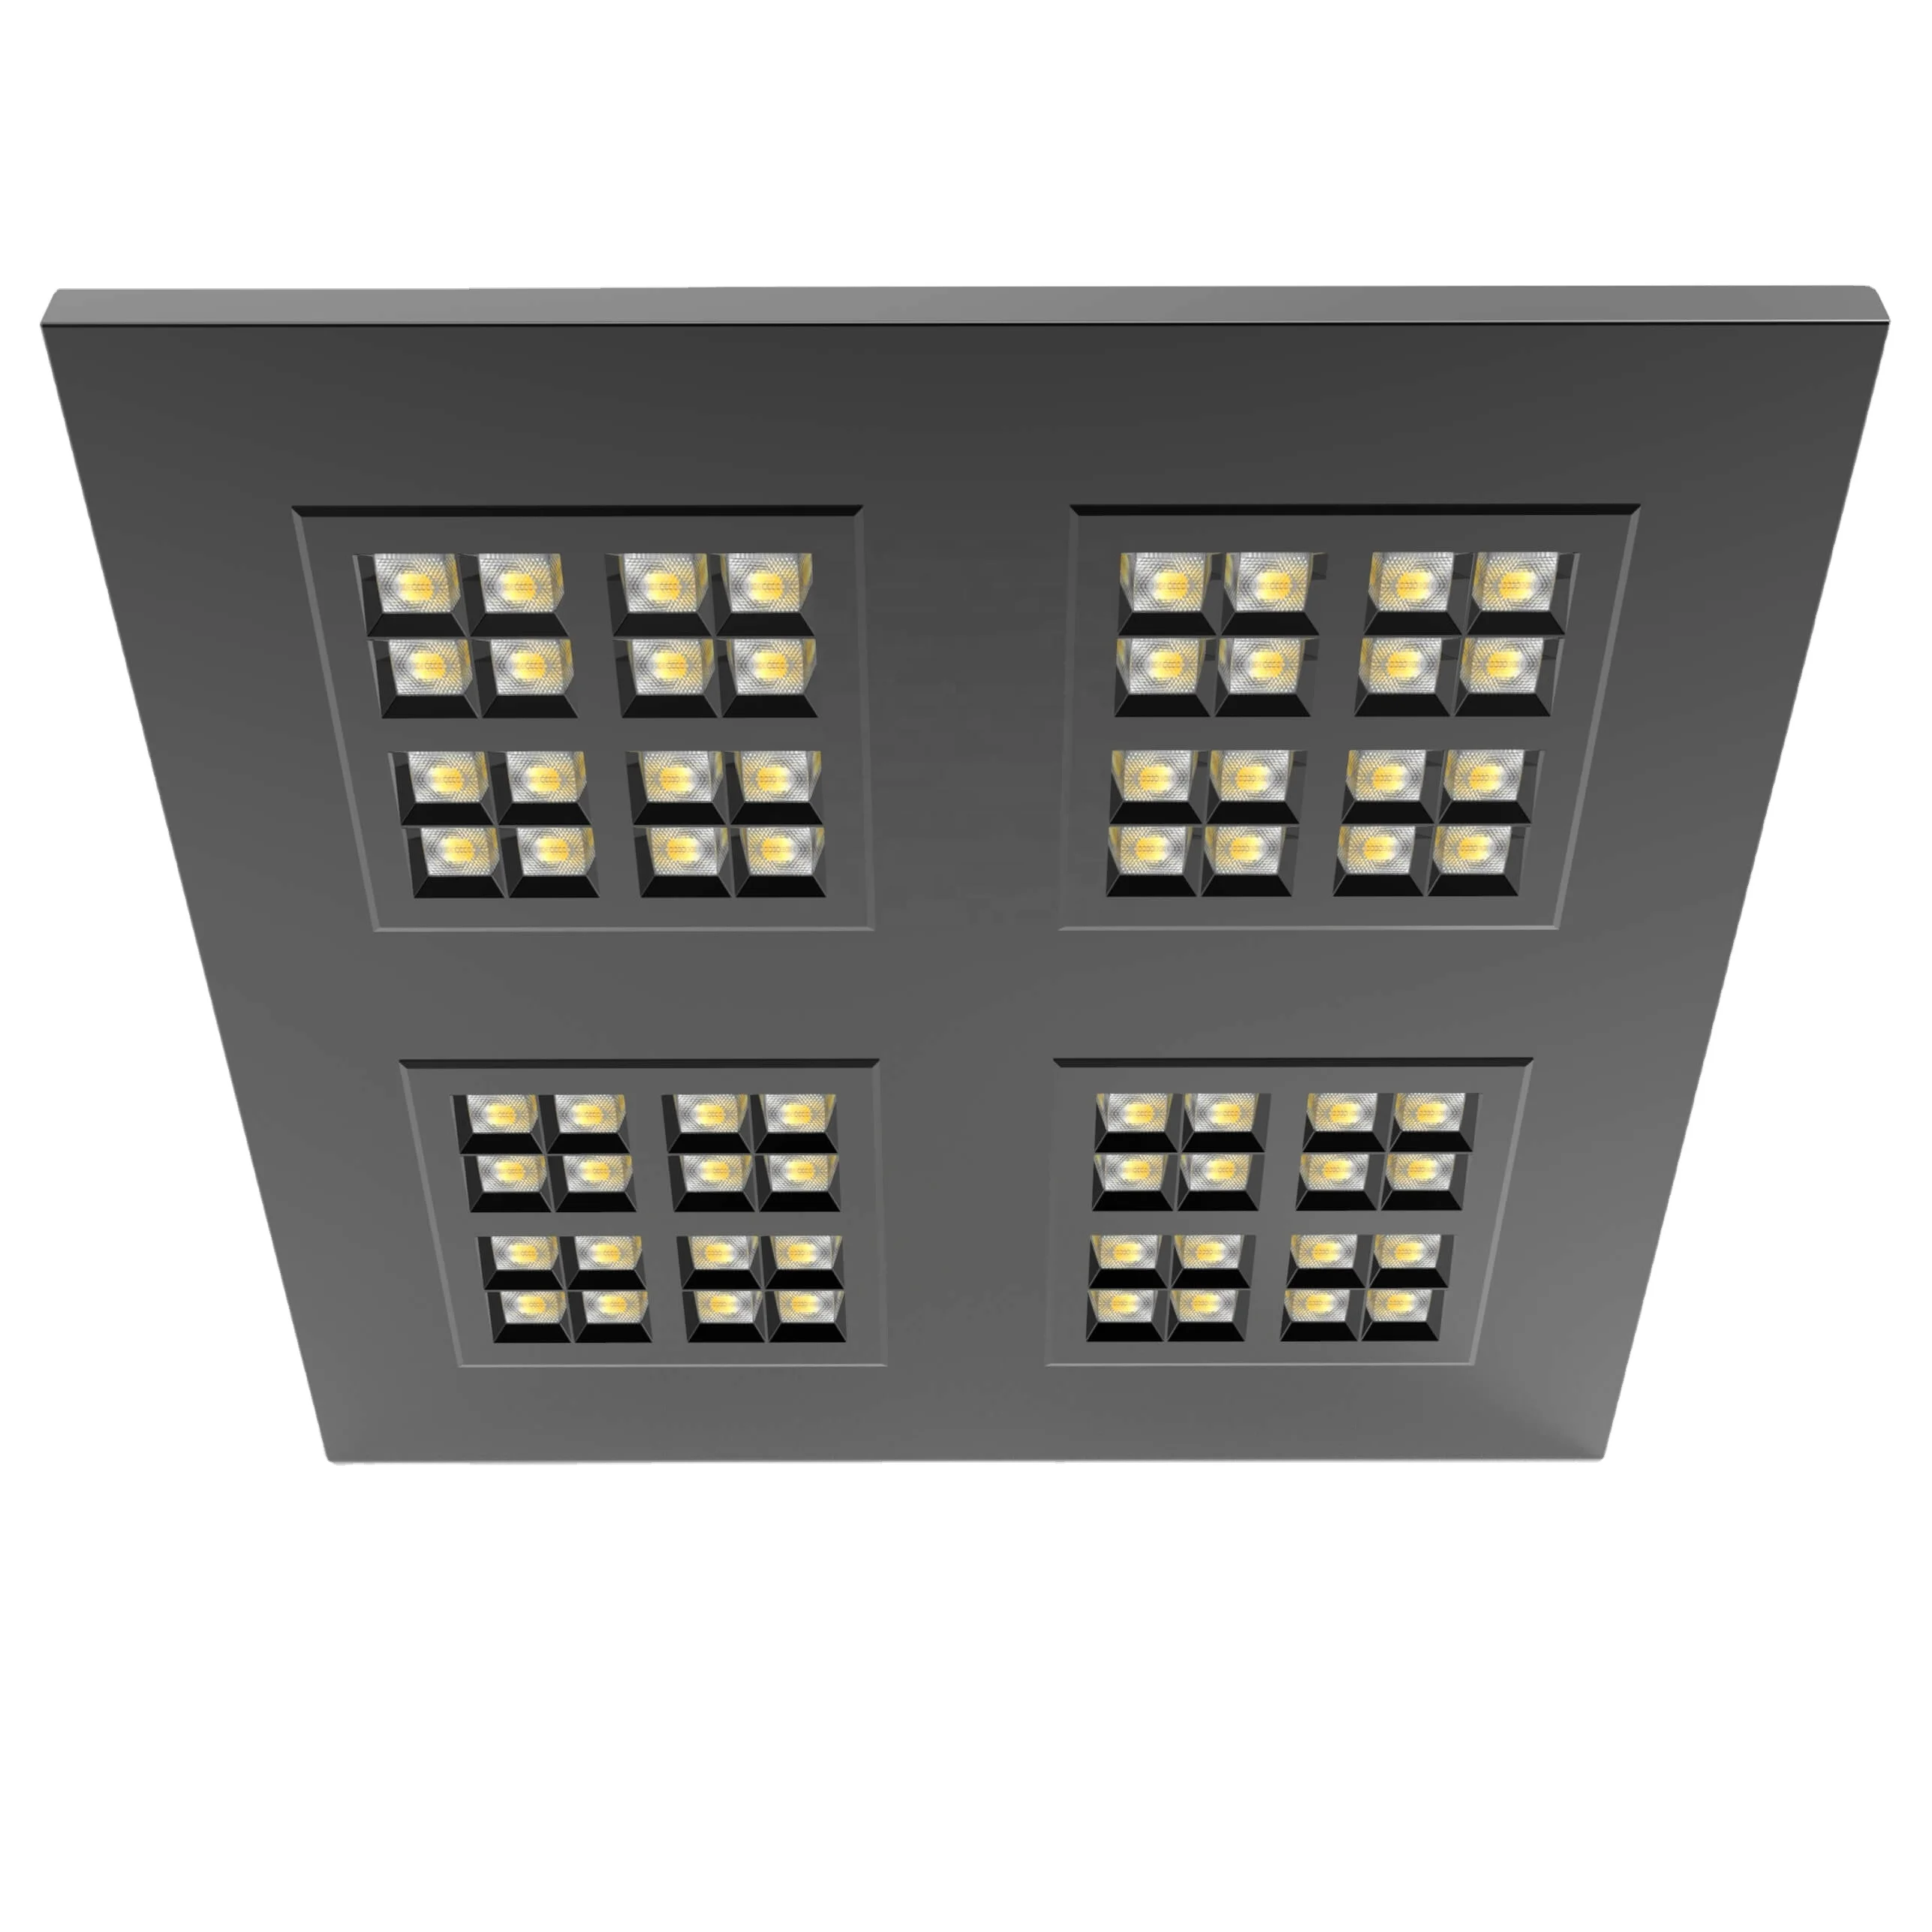 CE C-tick ROHS certificate elegant appearance touch sensitive mounted conceal  Indoor Square LED Panel Light